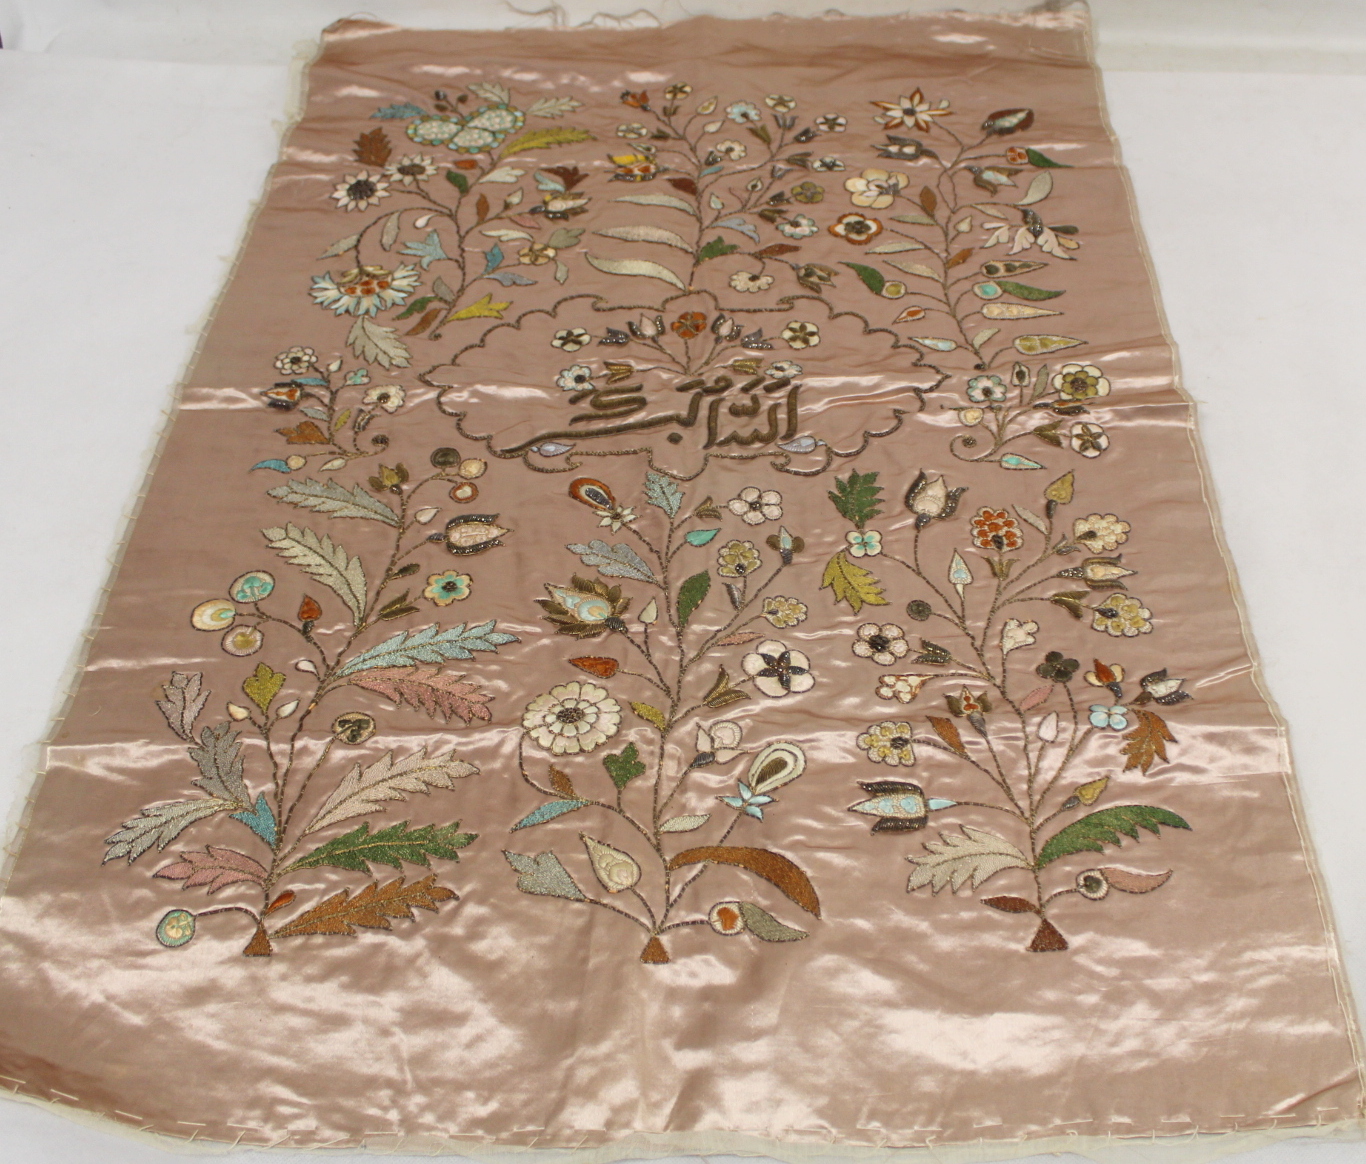 19th or early 20th century Persian embroidered silk panel, the pale pink ground with central panel